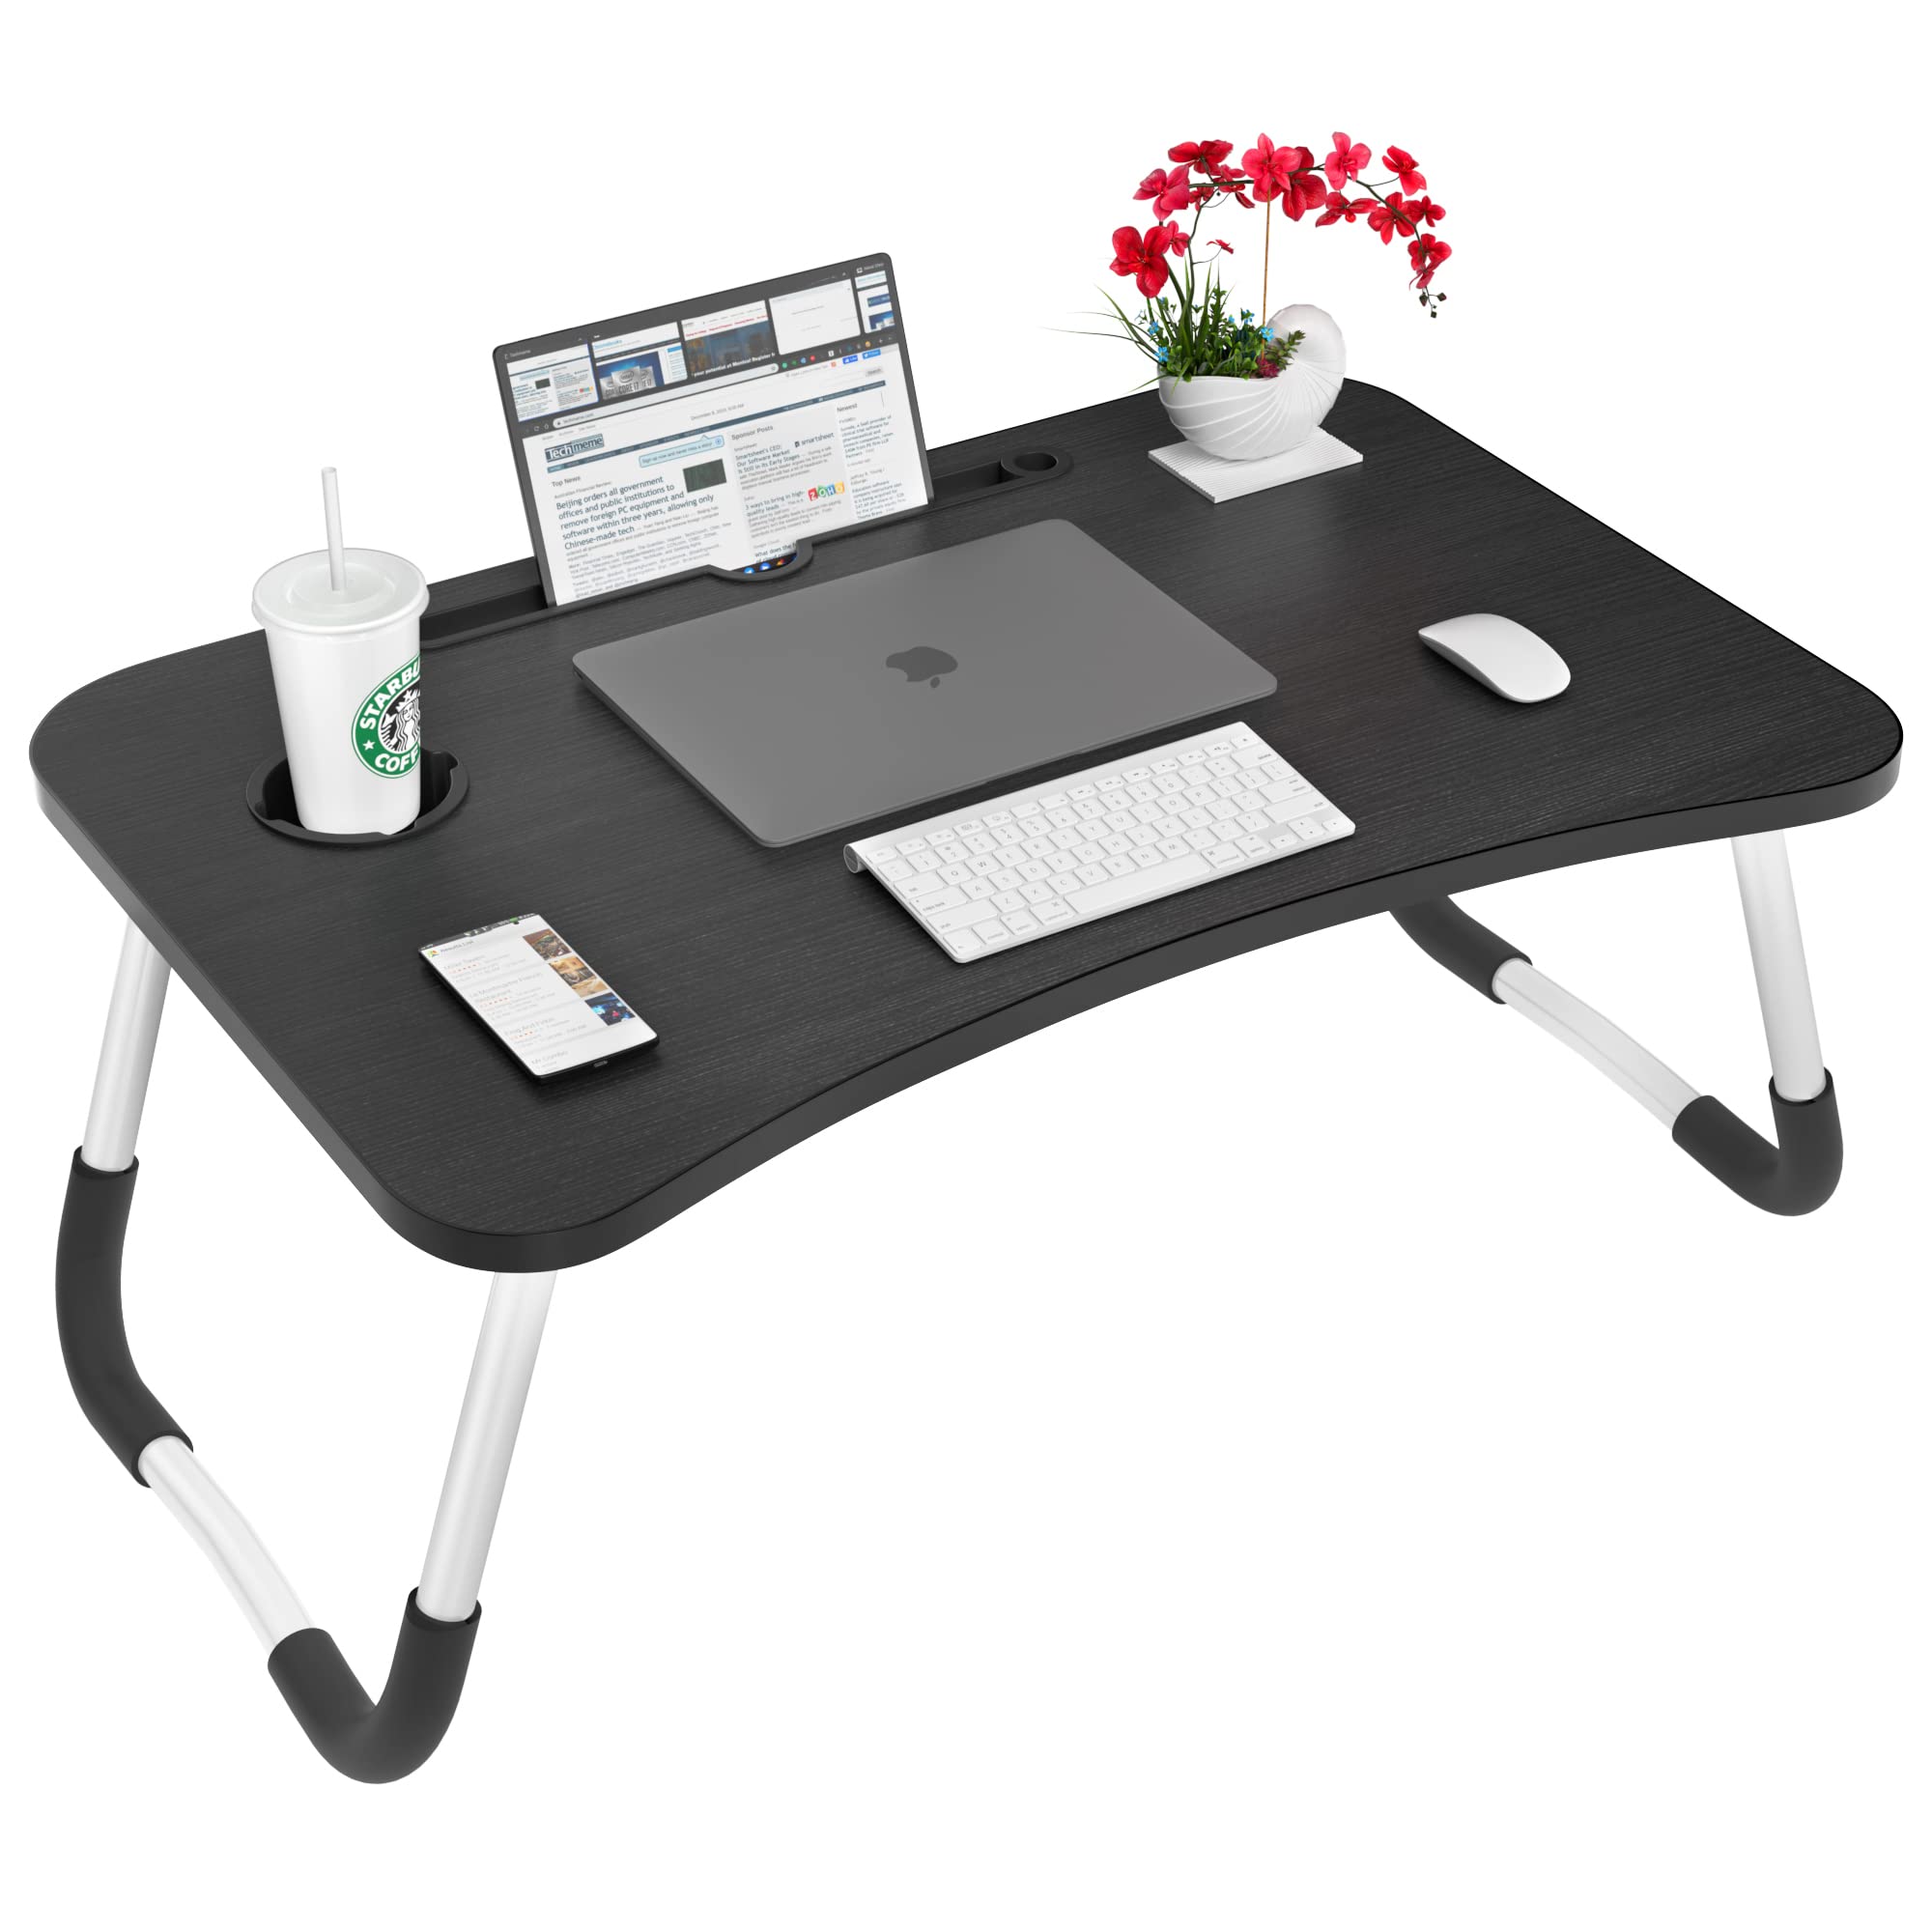 Astoryou Lap Desk, Foldable Laptop Table for Bed Portable Bed Desk for Laptop with Cup Holder, Laptop Desk Bed Trays for Working, Eating and Writing (Black)